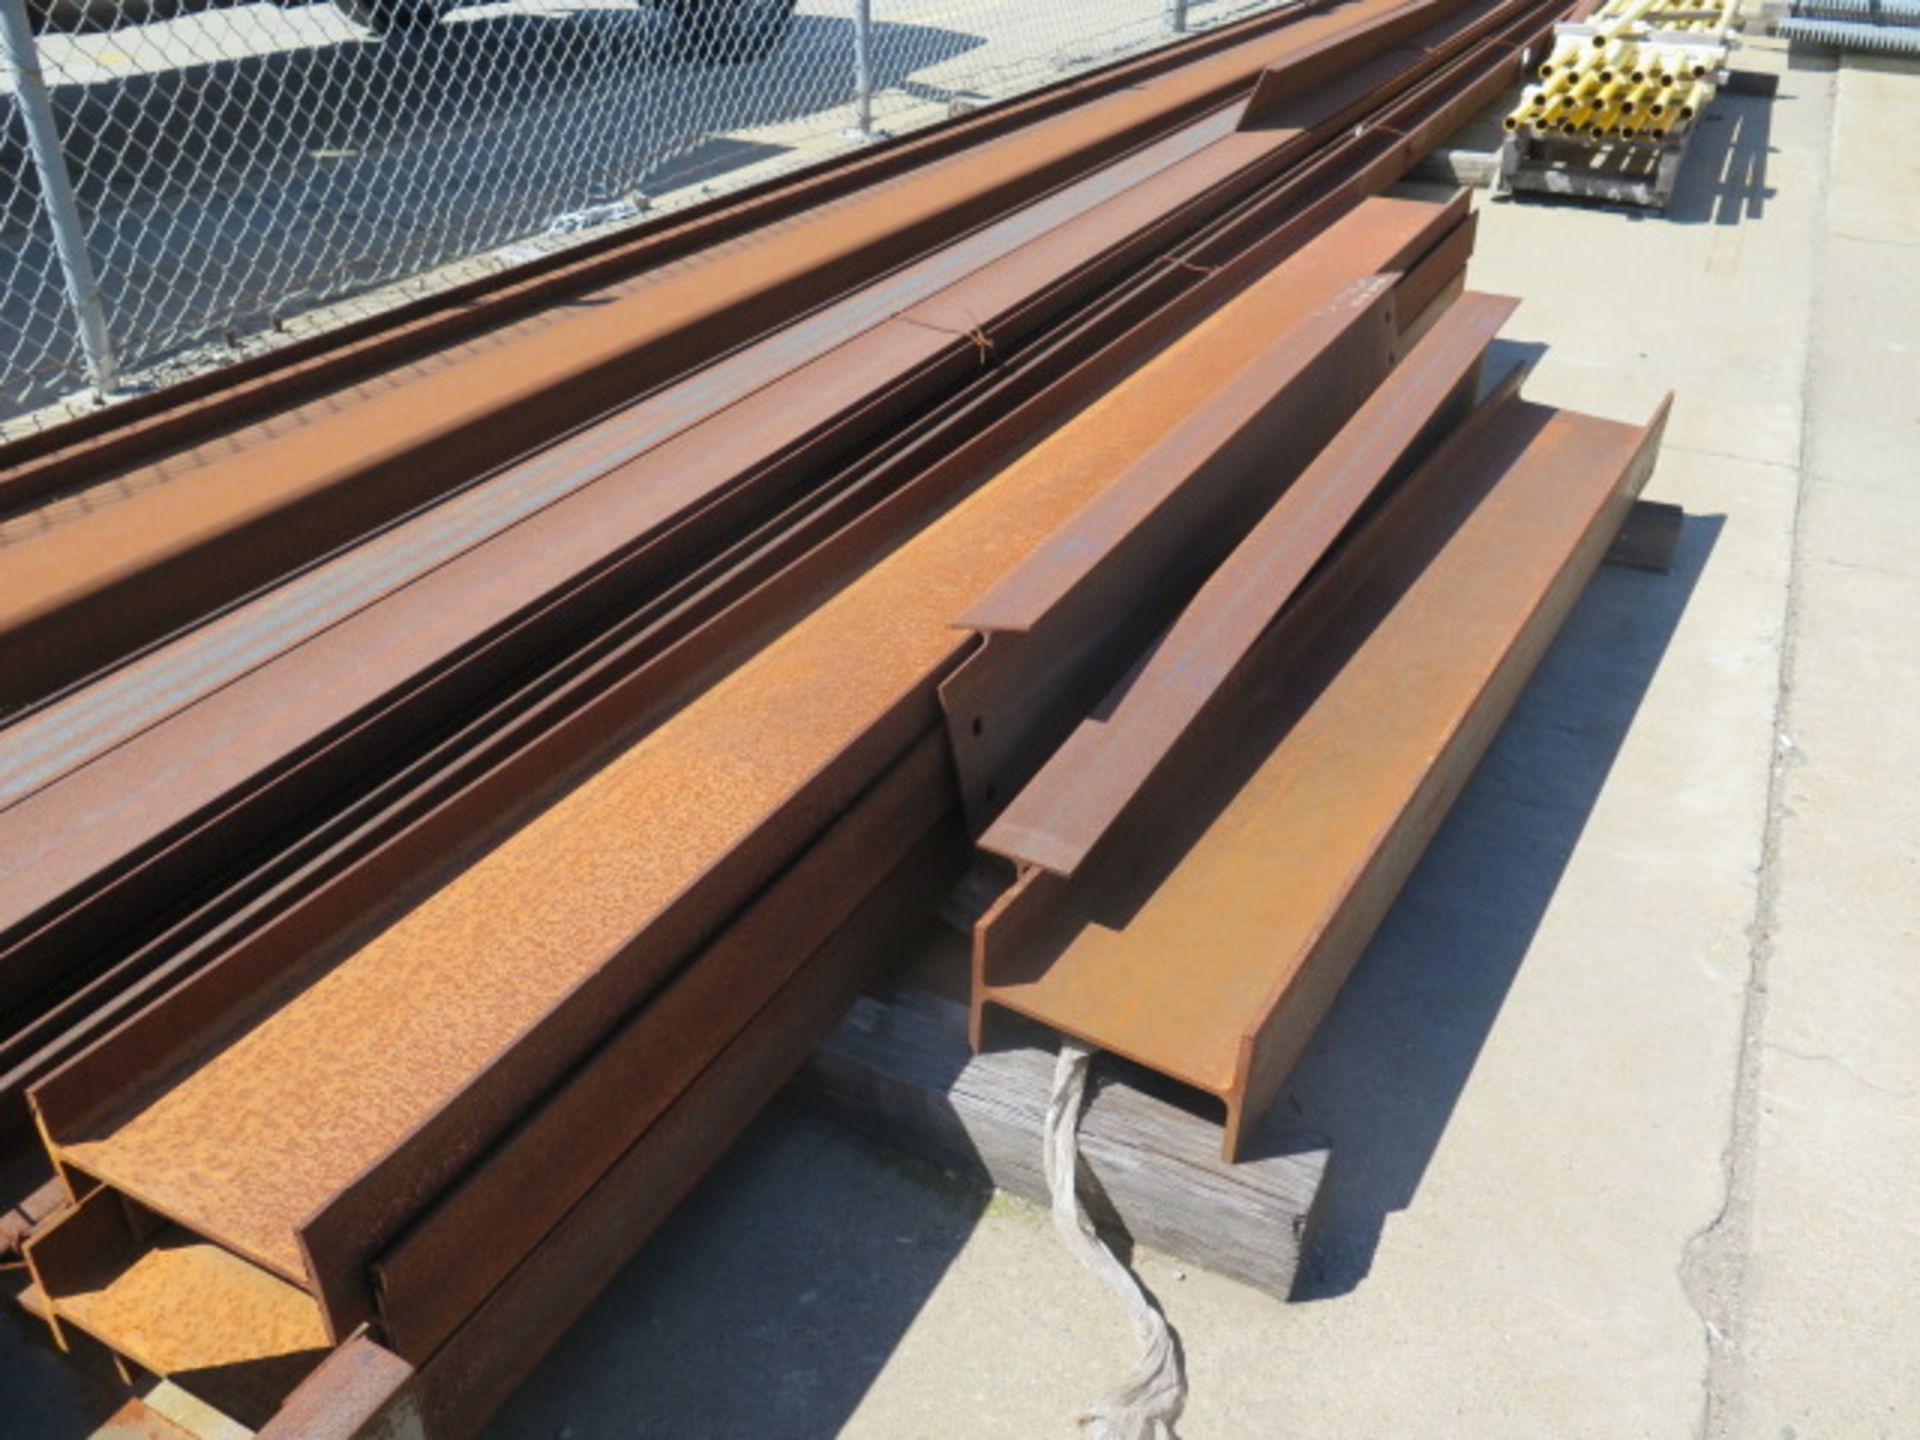 Raw Materials H-Beam, I-Beam, Channel, Square and Round Tubing, Angle and Galvanized Grating (SOLD - Image 16 of 22